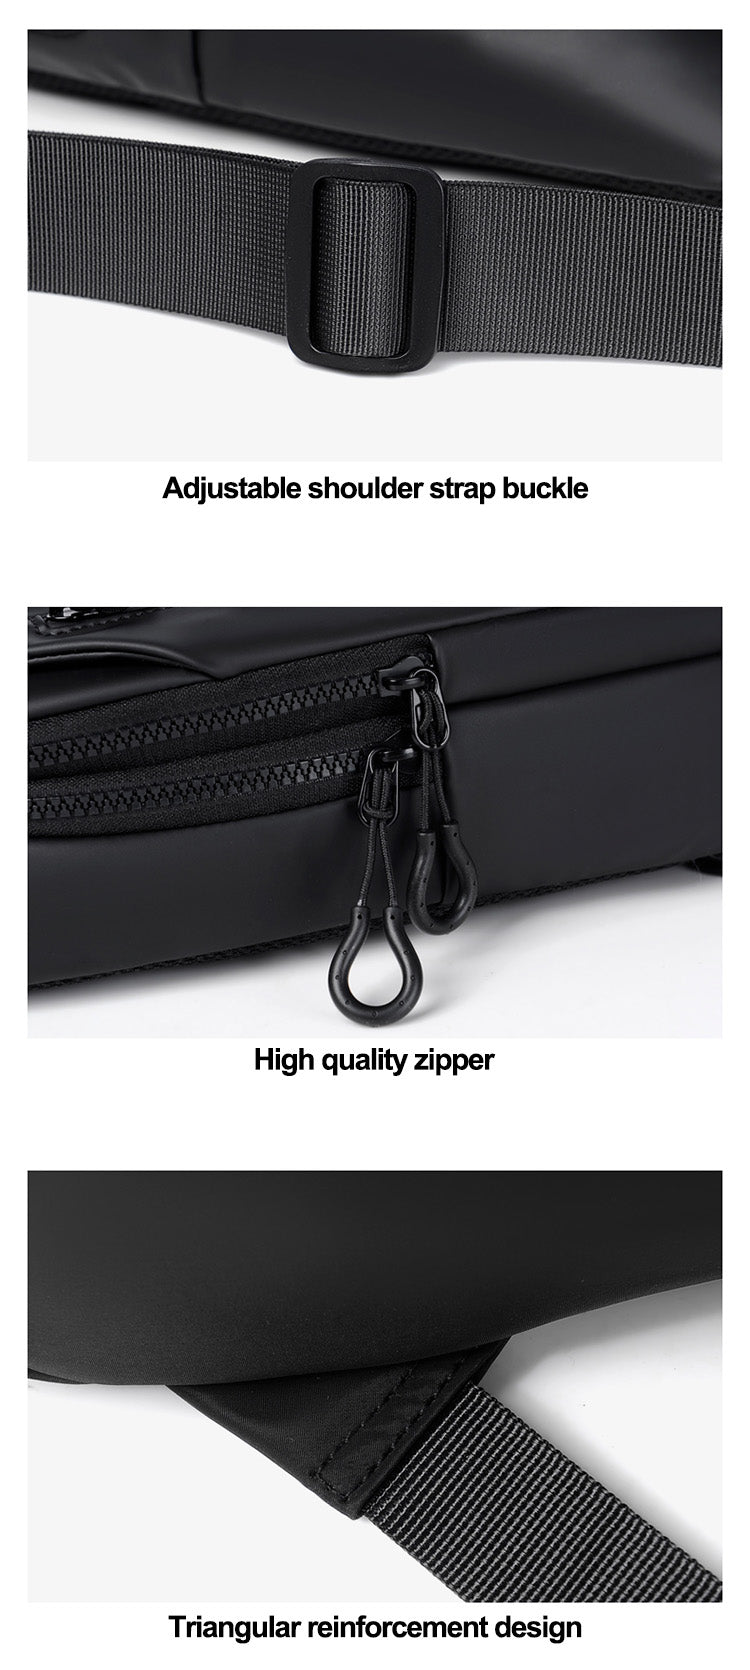 abrazo unisex casual messenger bag new popular designer shoulder PU waterproof sling chest bag with USB for Travel Outdoor Casual, Black - Abrazo